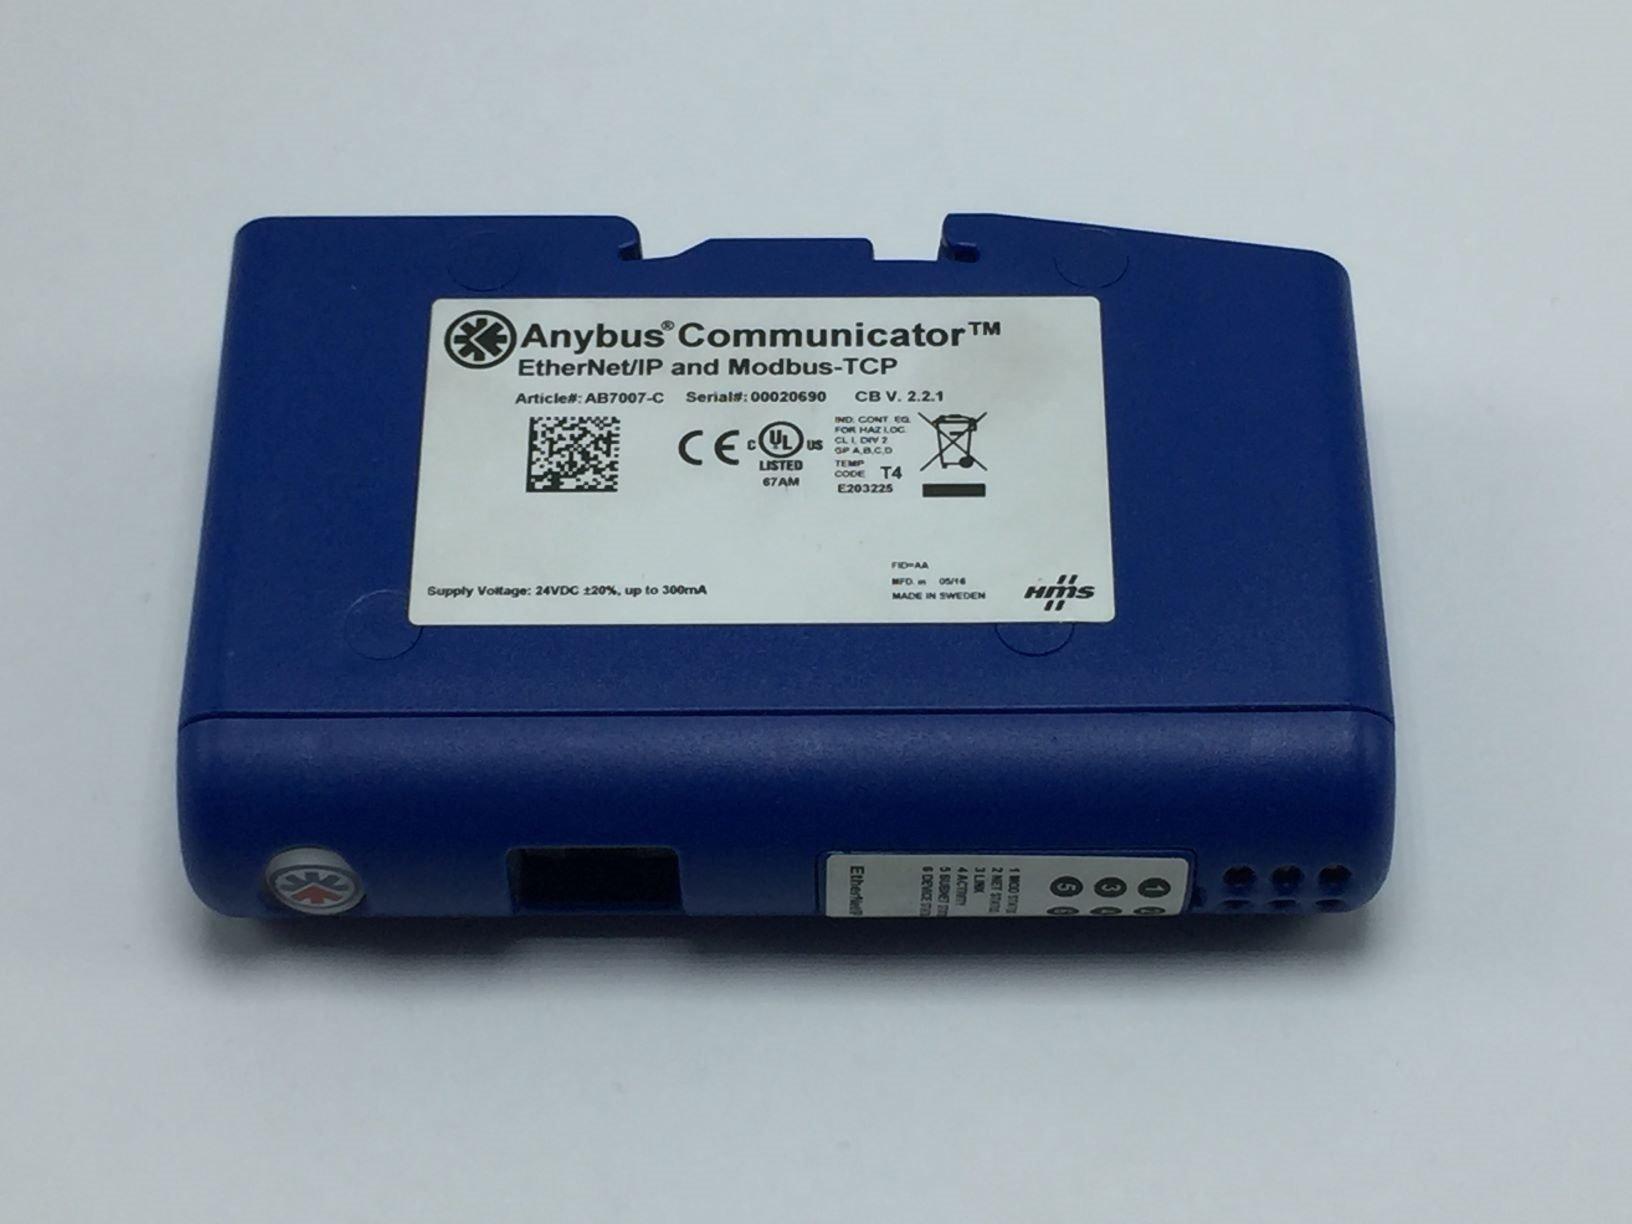  HMS INDUSTRIAL NETWORKS AB7007-C ANYBUS COMMUNICATOR ETHERNET/IP & MODBUS-TCP 2